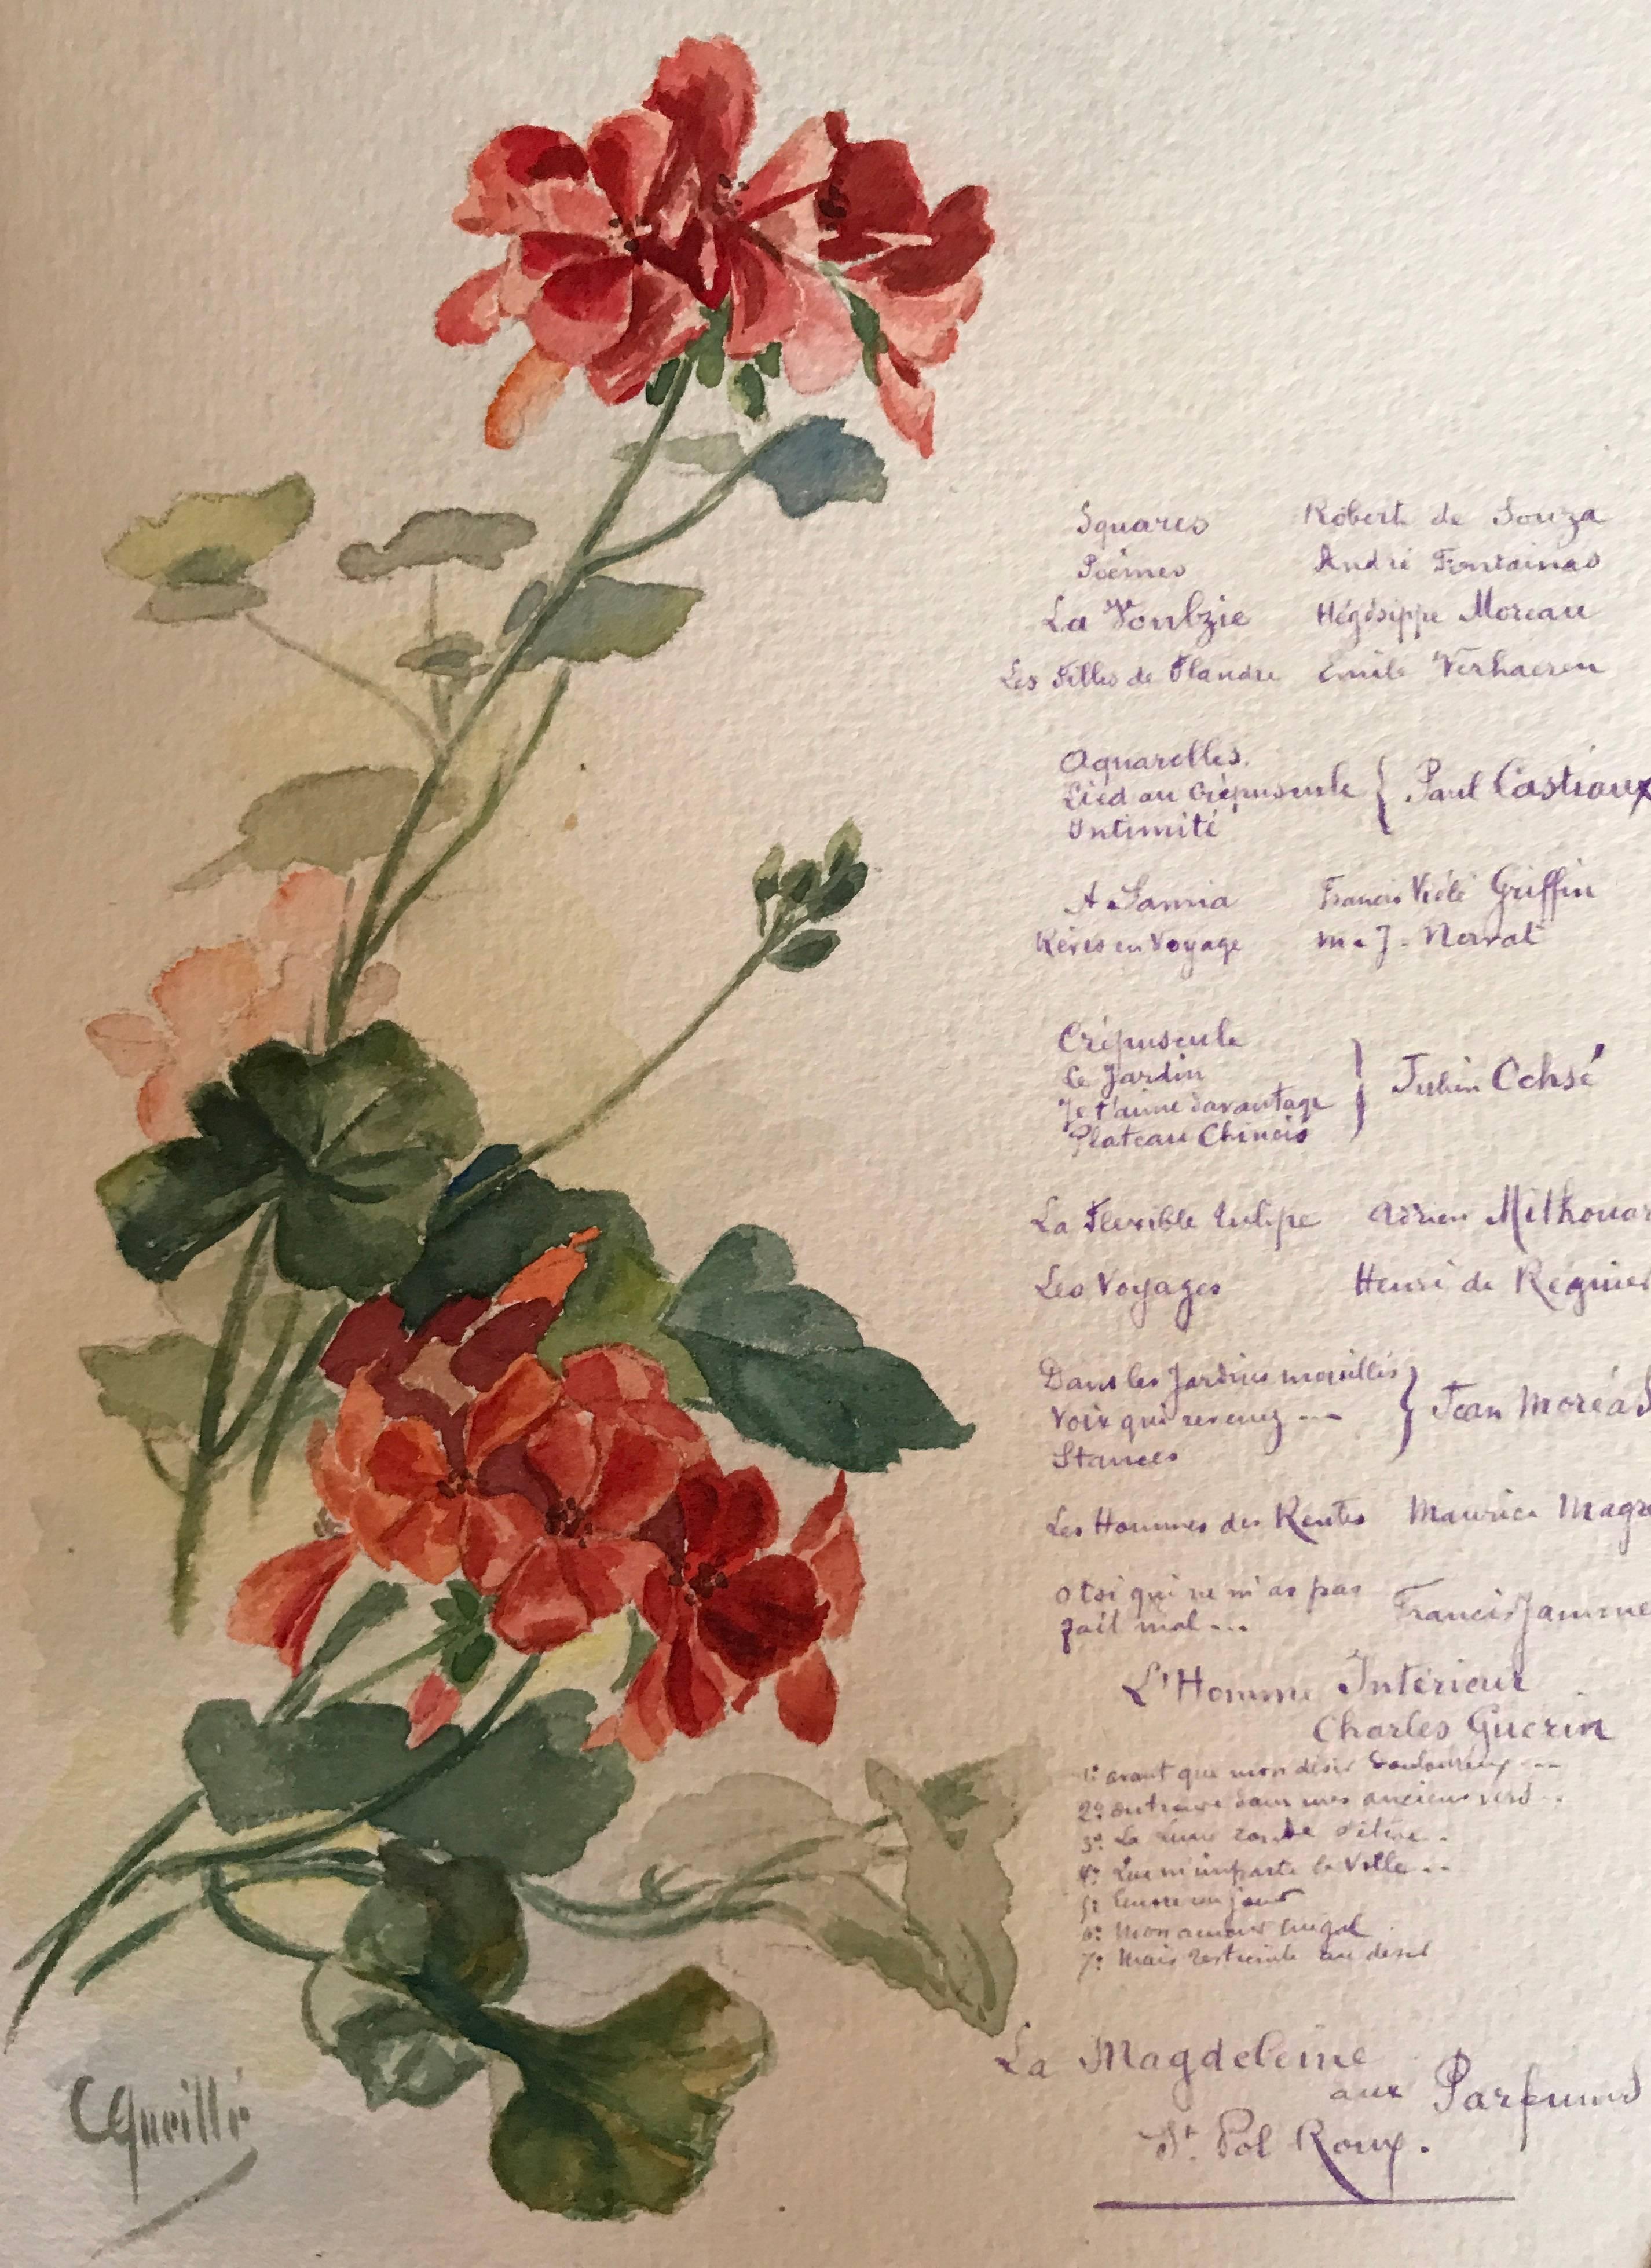 Beautiful group of nine (9) original French watercolour paintings - mainly of a floral and landscape nature. The works date between 1904 and 1941 - with the majority being around the 1910's and 1920's period. 

The paintings are all inscribed